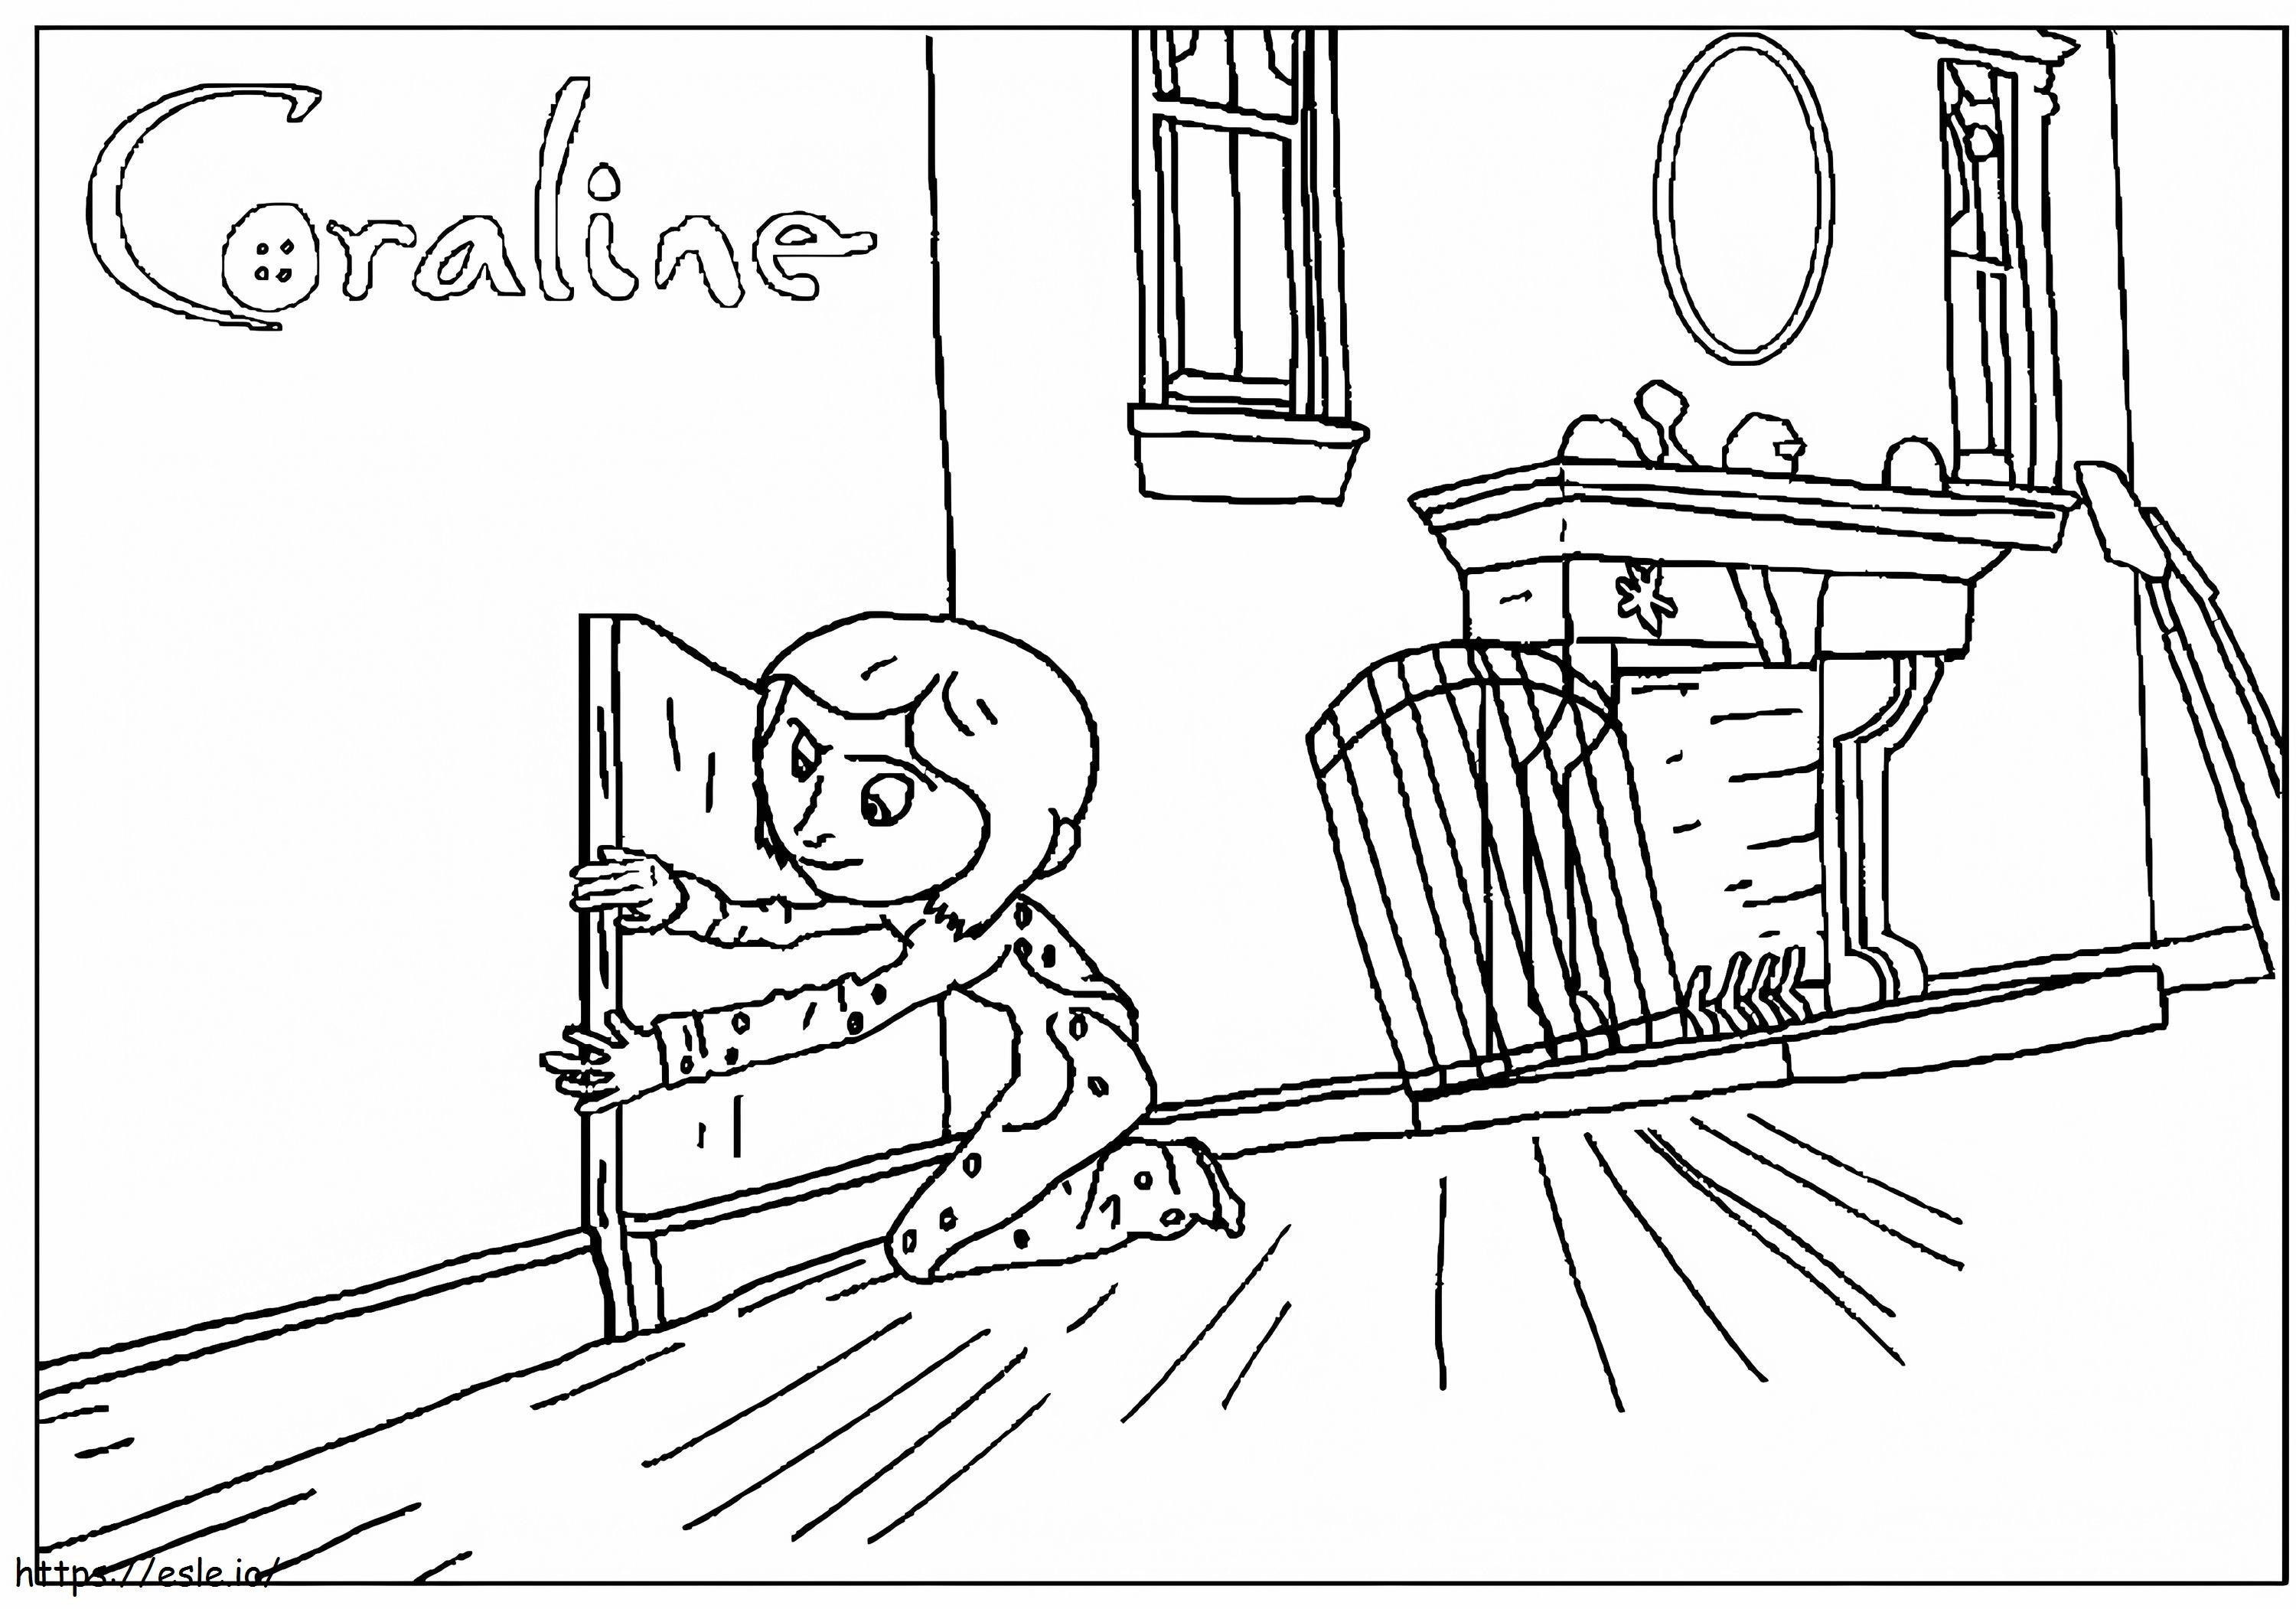 Coraline 7 coloring page